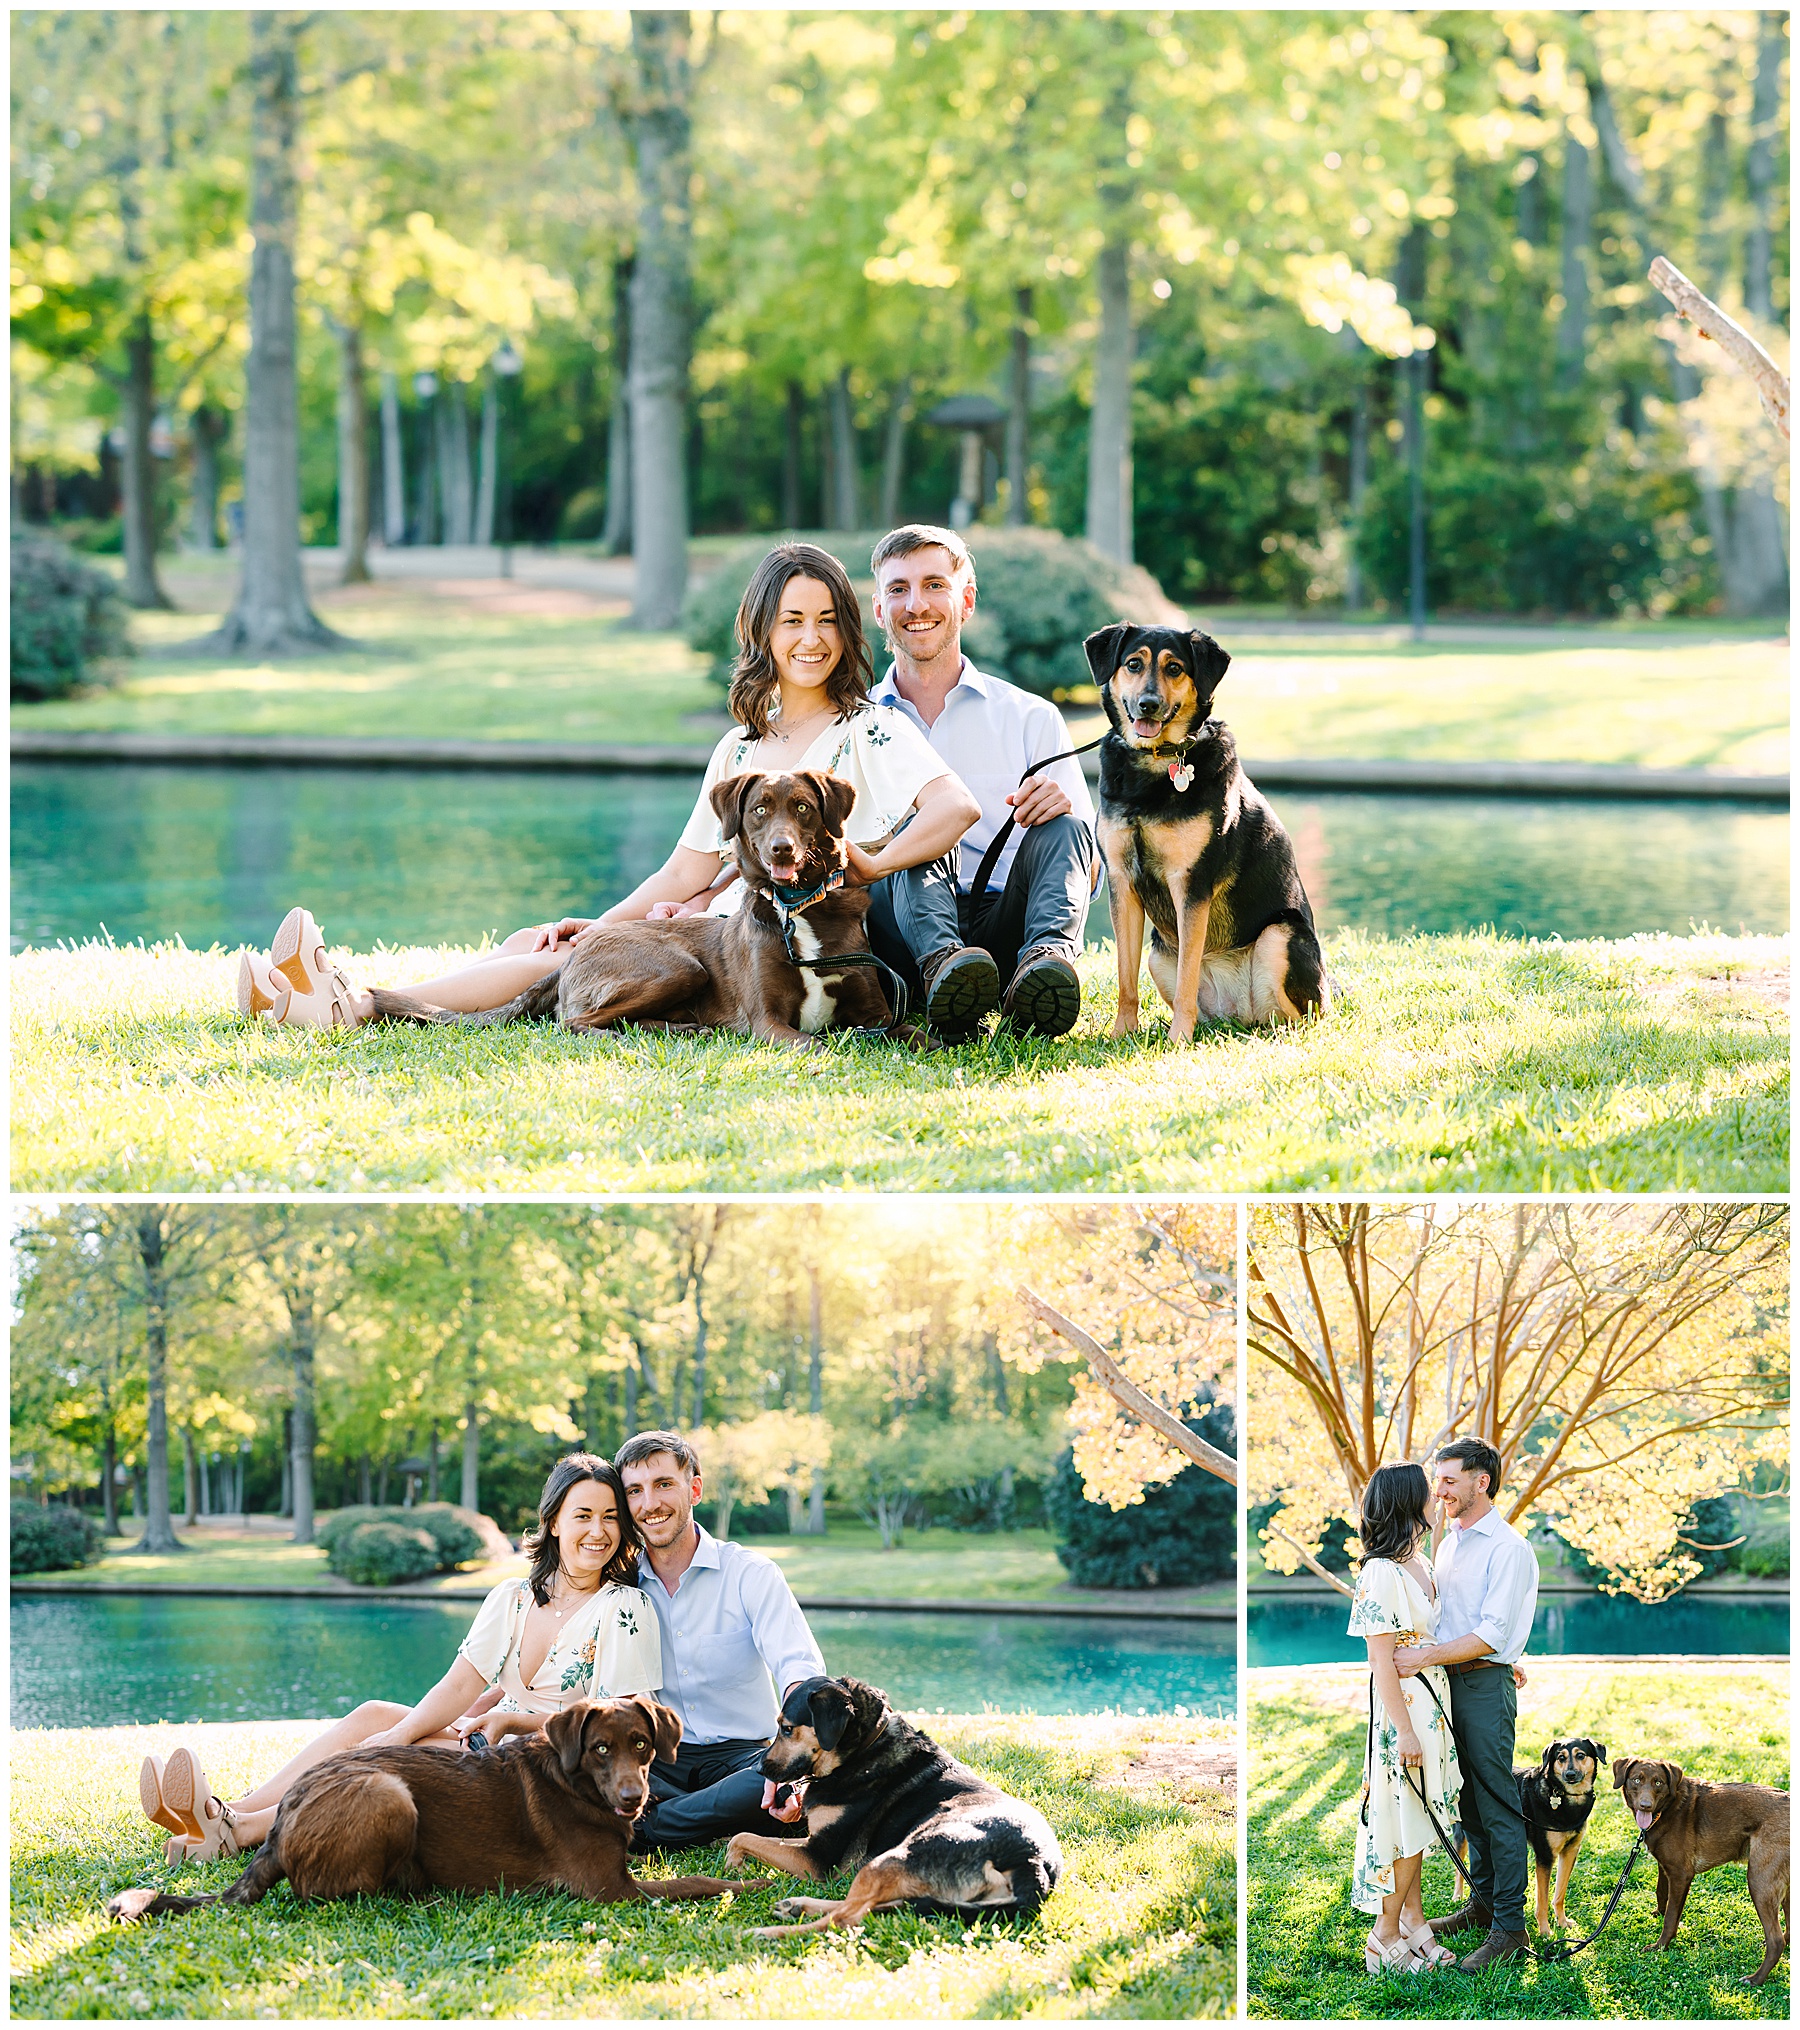 engaged couples photos at a park.jpg